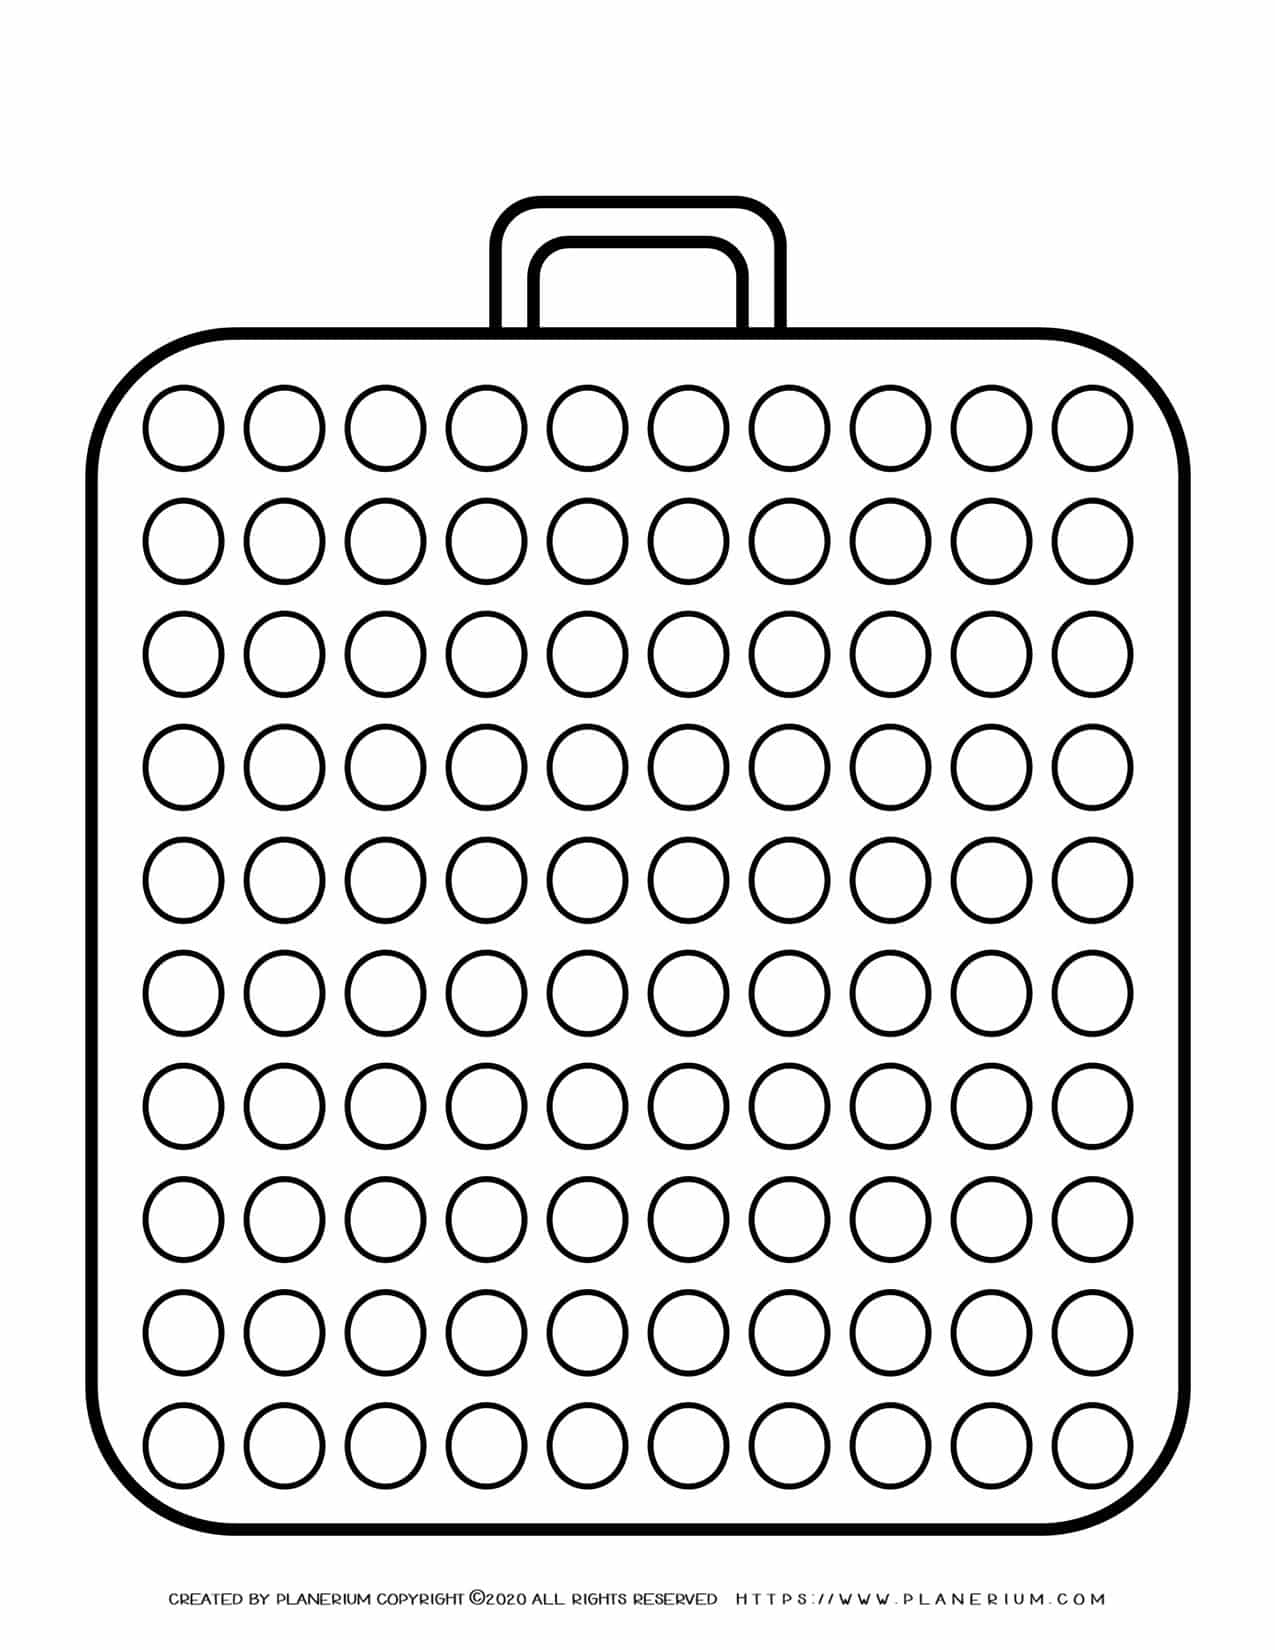 Templates - Big Suitcase With a Hundred Circles | Planerium